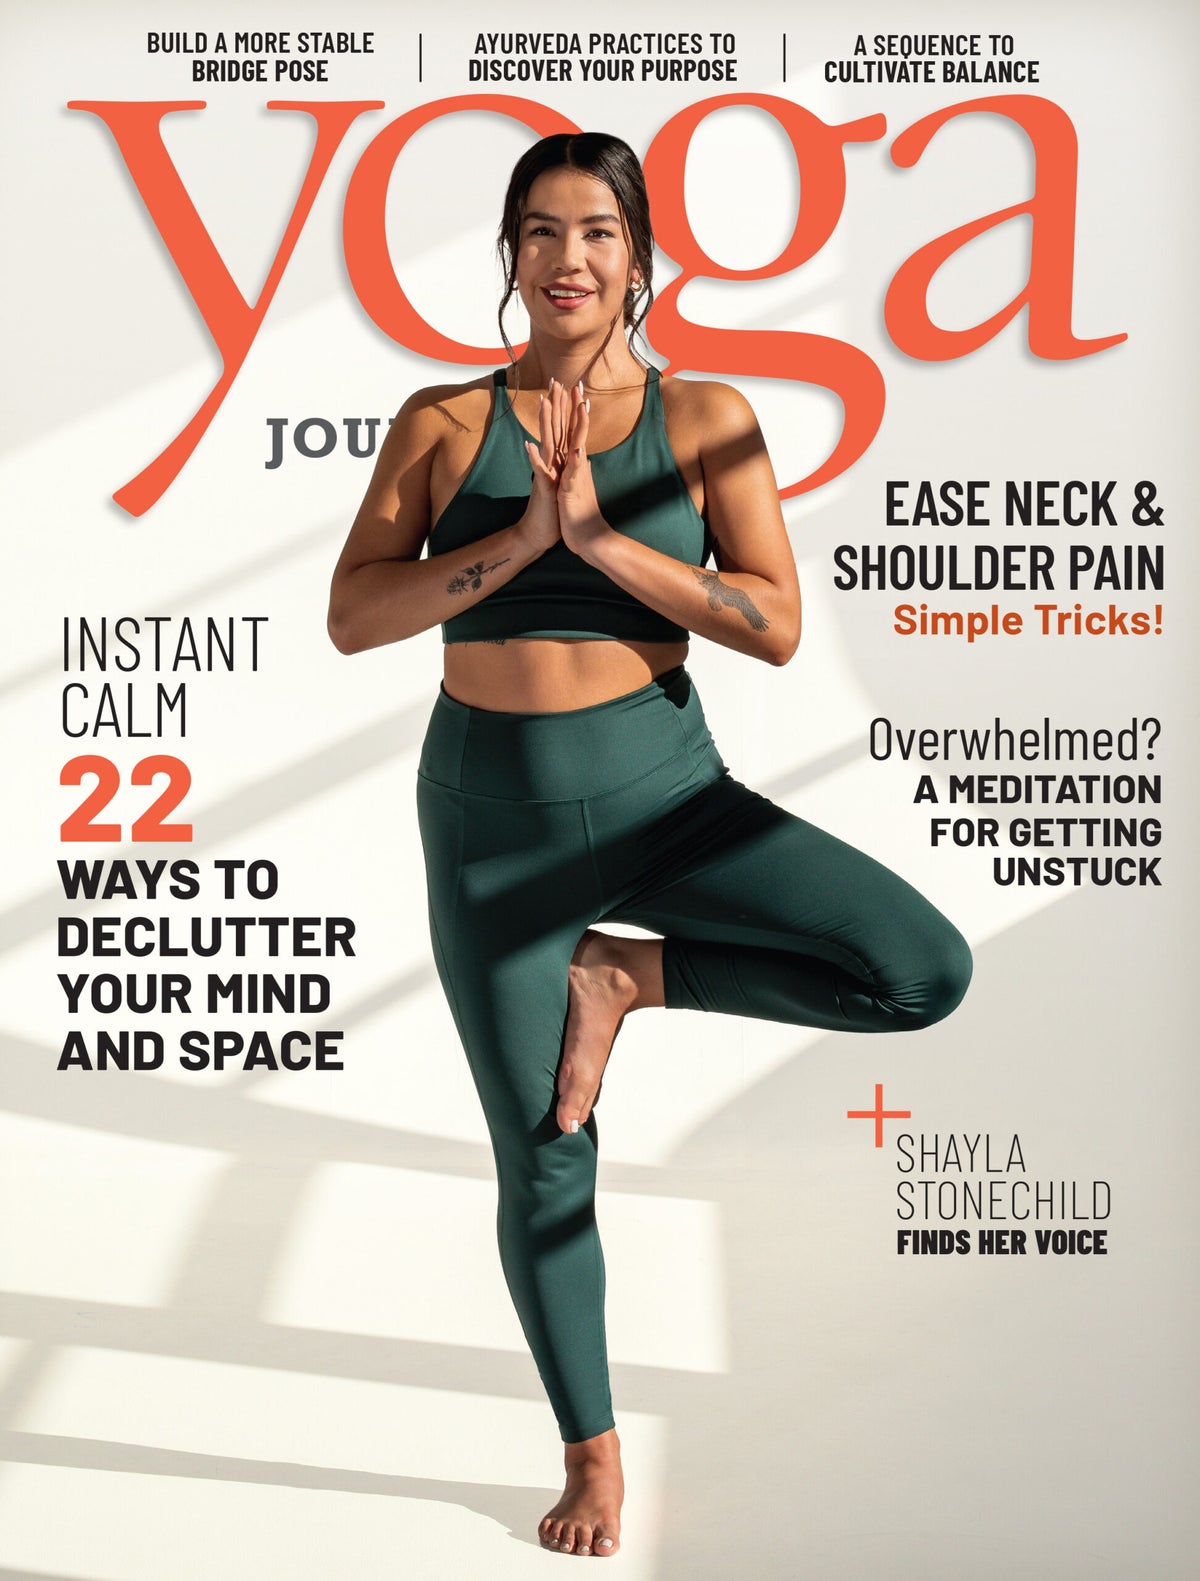 Advertise with Yoga Journal